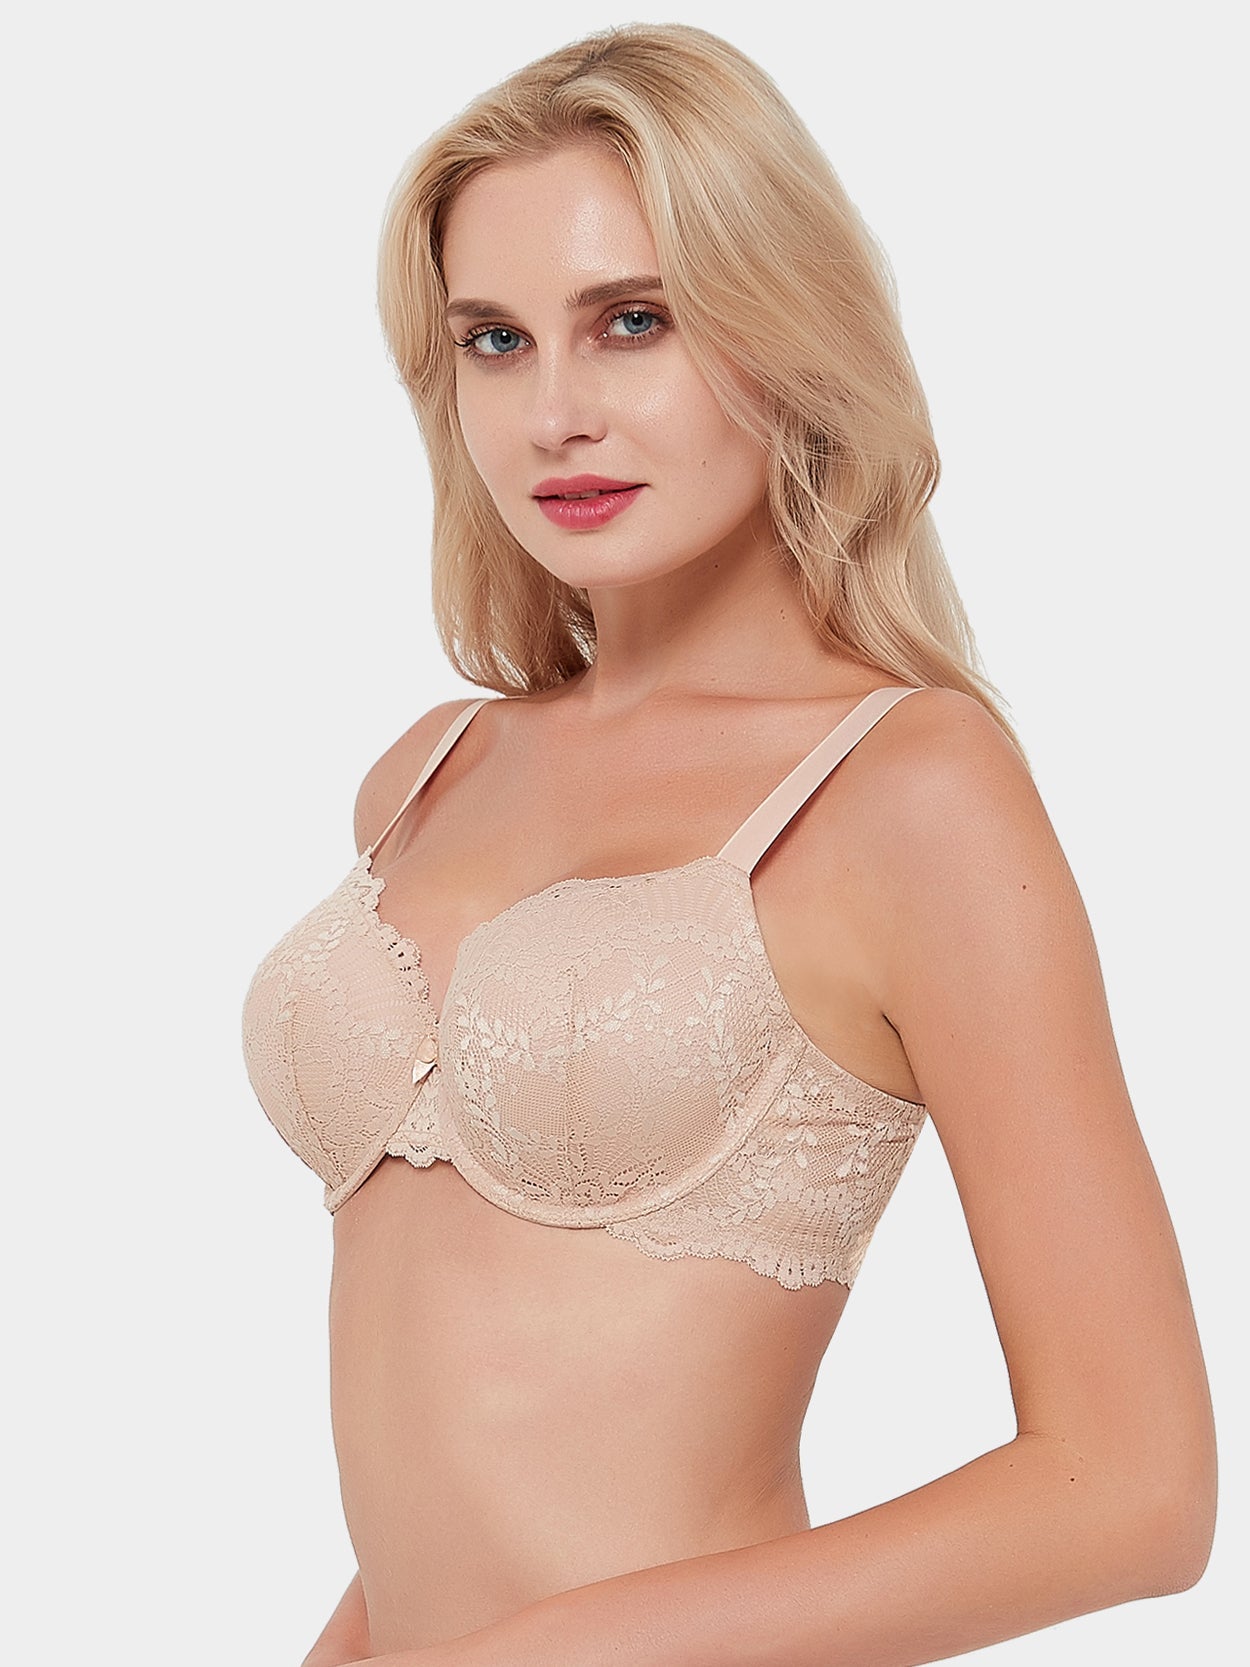 Push Up Bra Women's Lace Underwire Bras Adjusted Plus Size